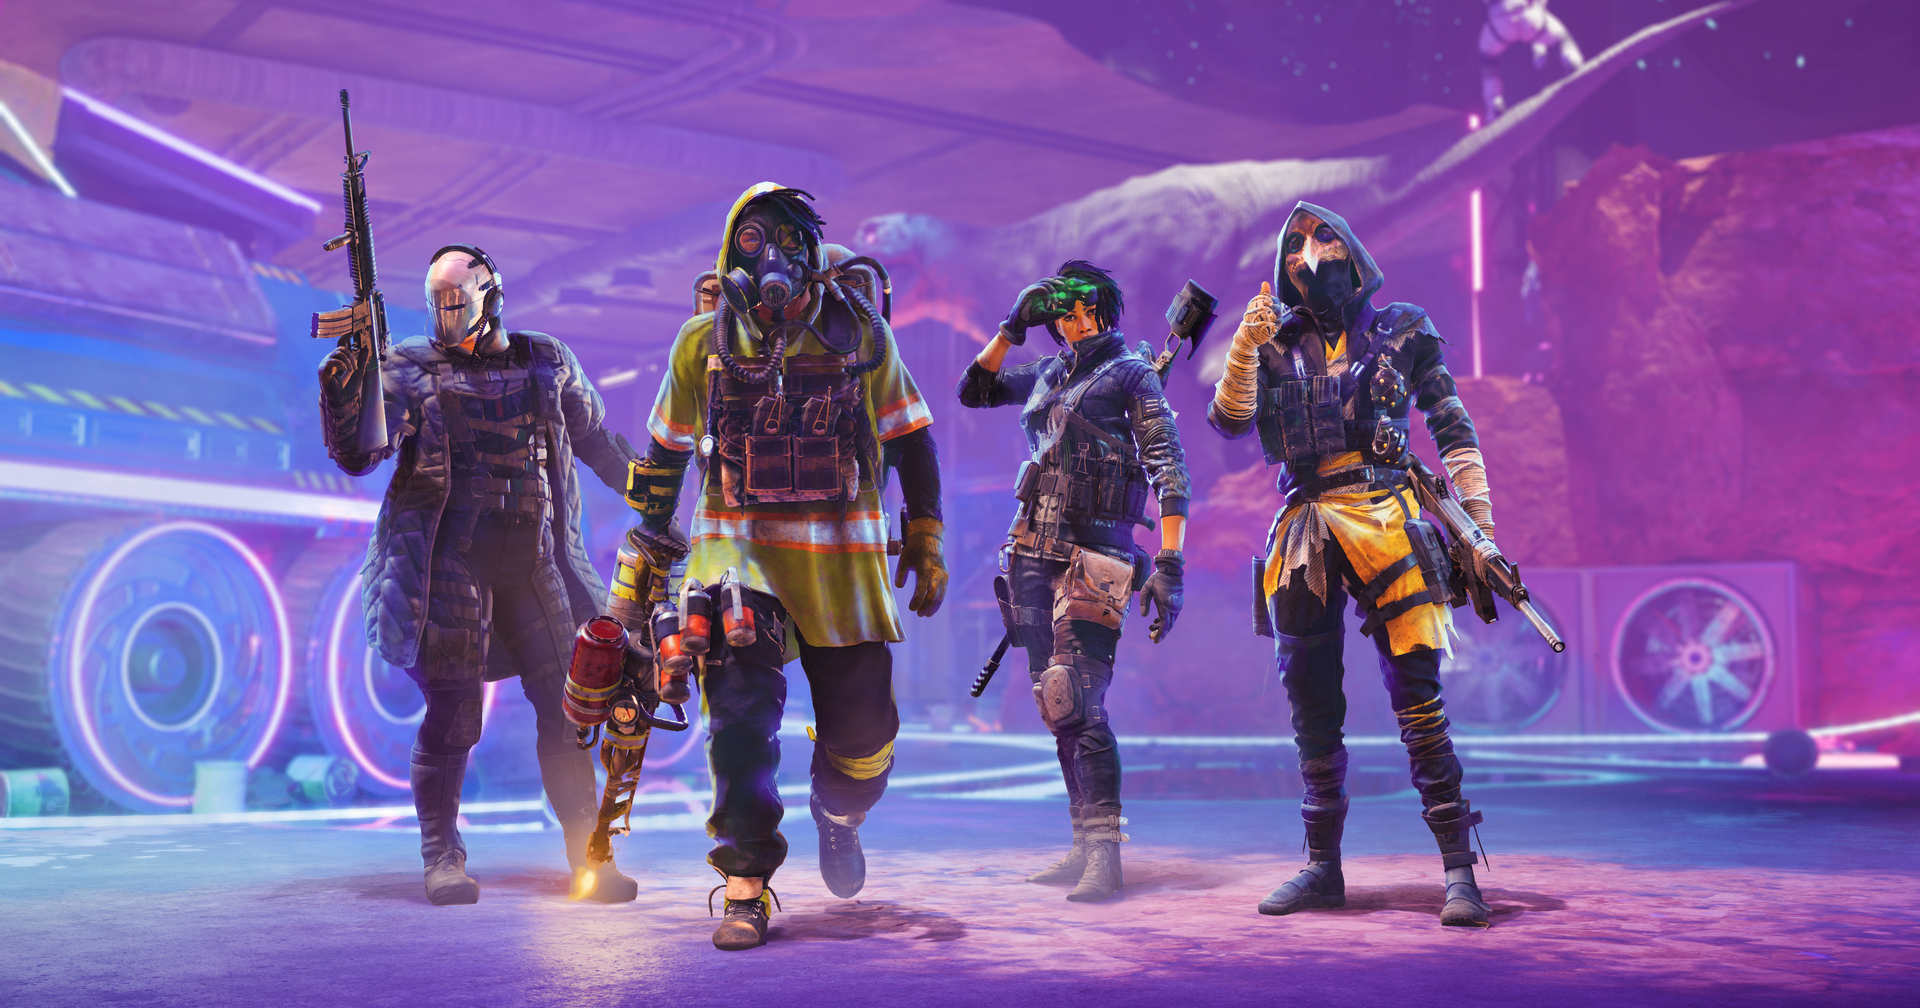 Play various factions in XDefiant, as seen here against a purple background in Totale. The release date is probably 2023.